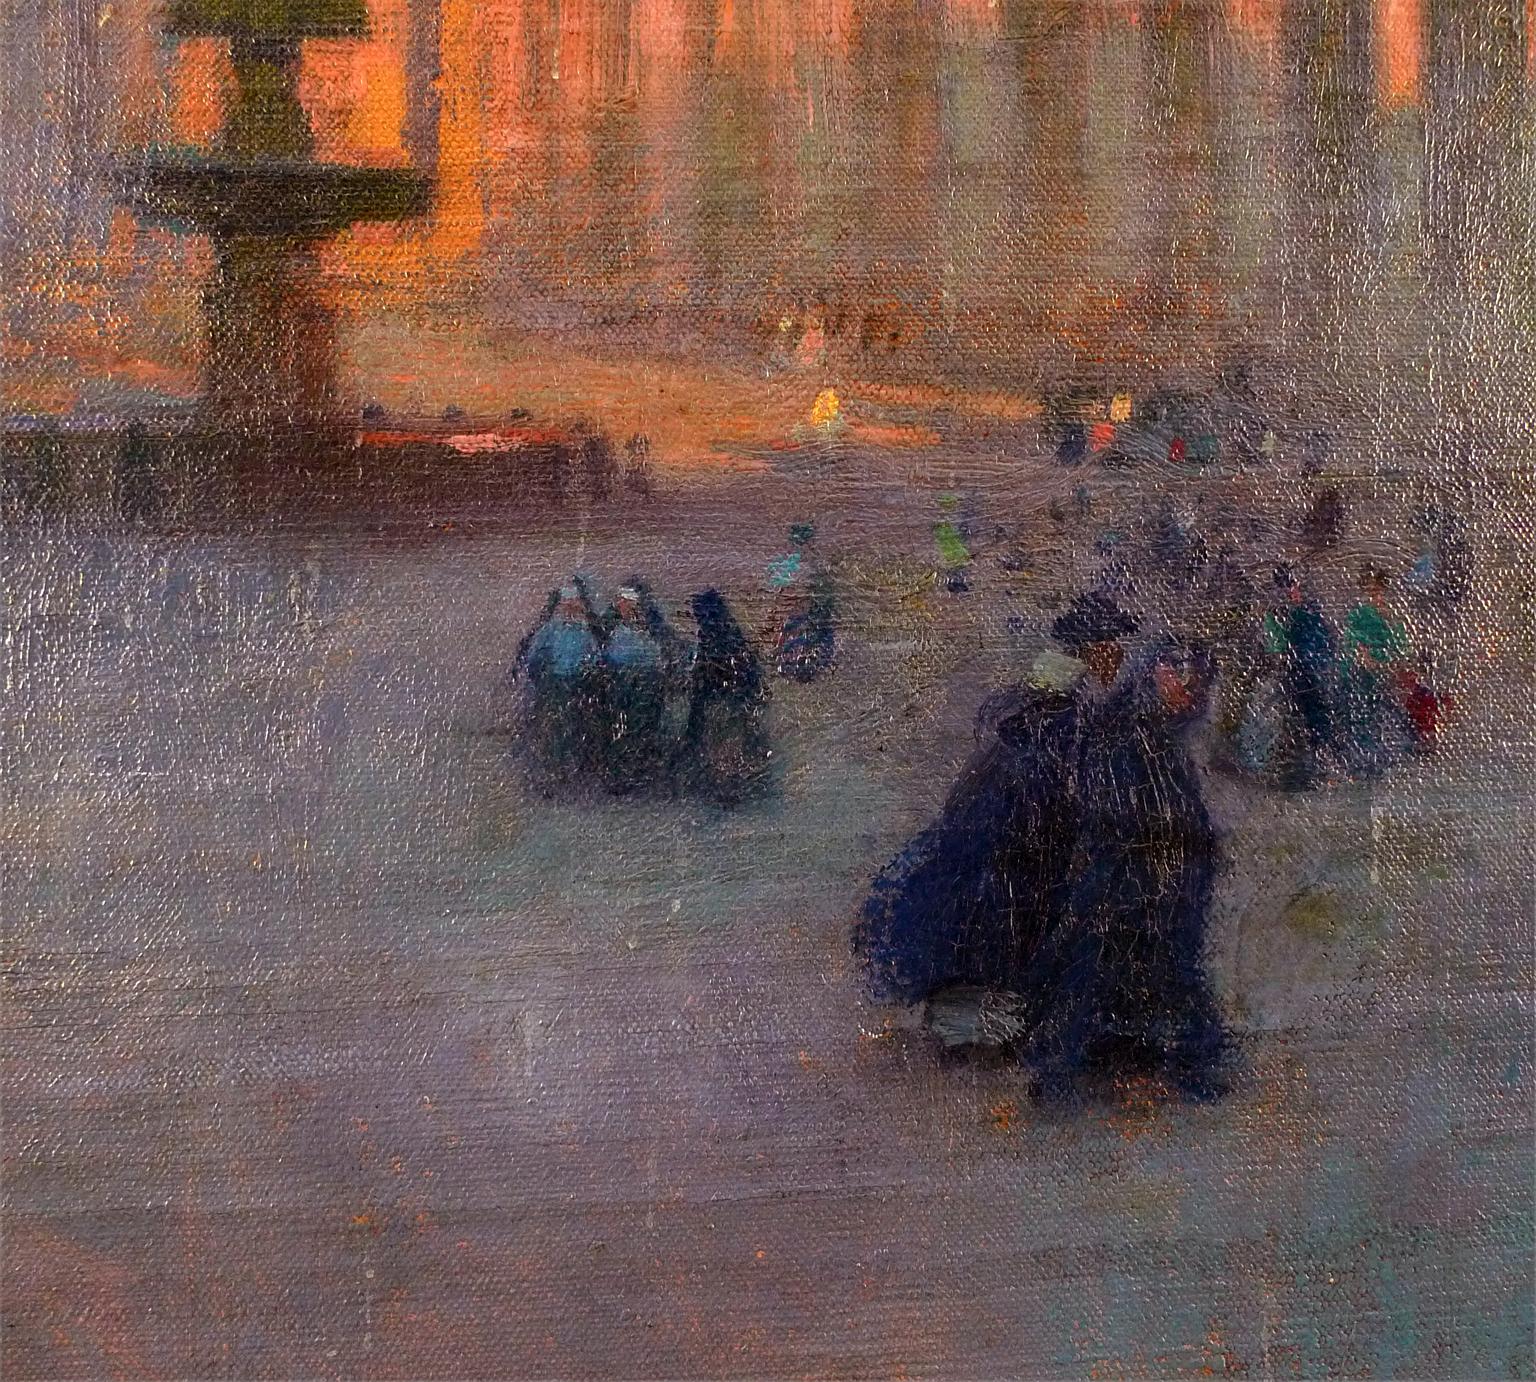 GUSTAVO BACARISAS
Gibraltian, 1873 - 1971
SAINT PETER´S SQUARE, ROME
signed 